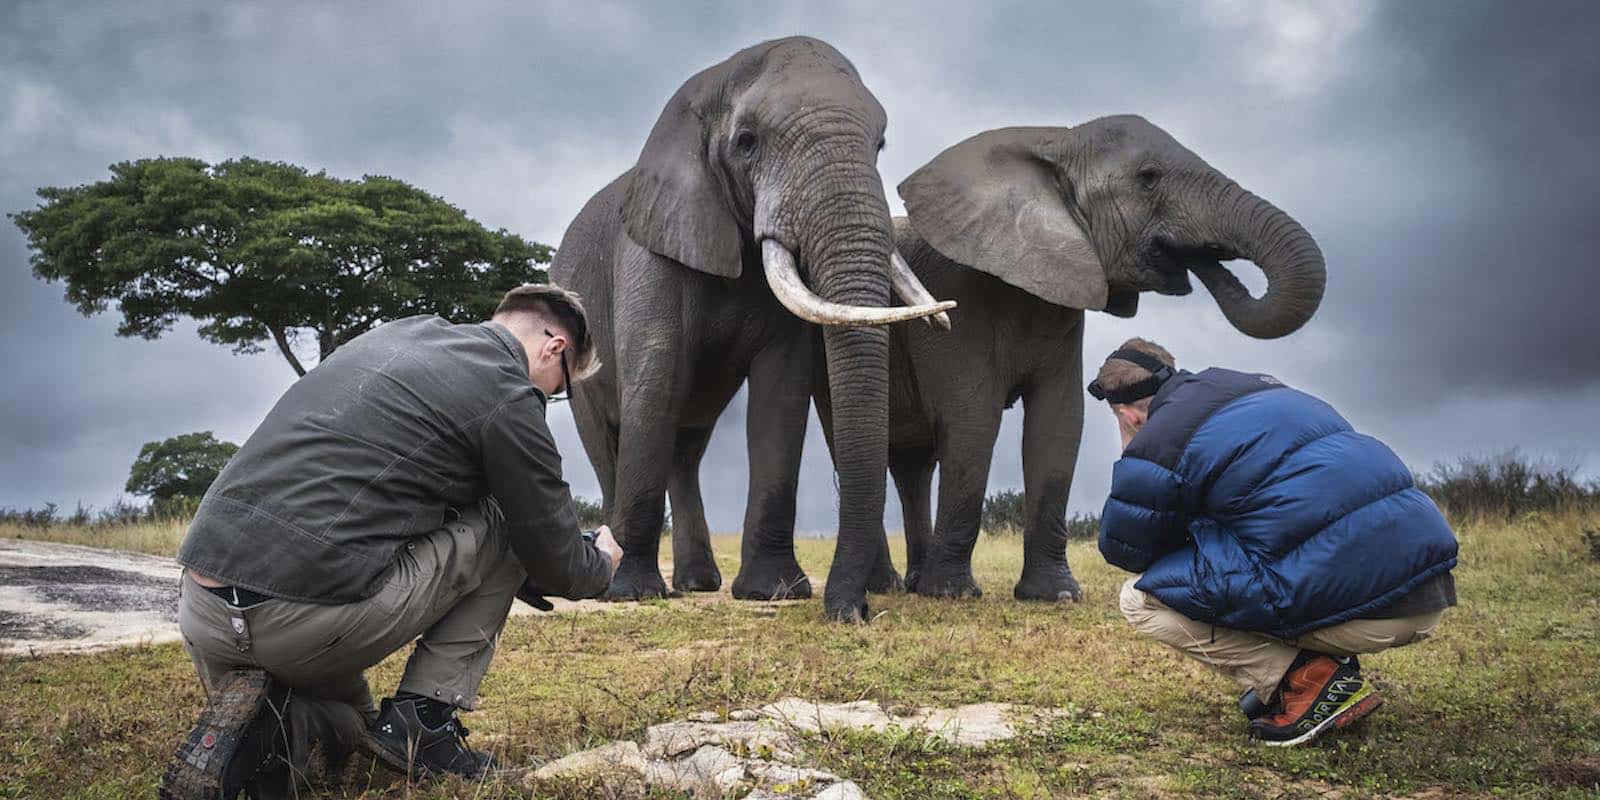 field experts observing the wildlife and elephants in Zimbabwe